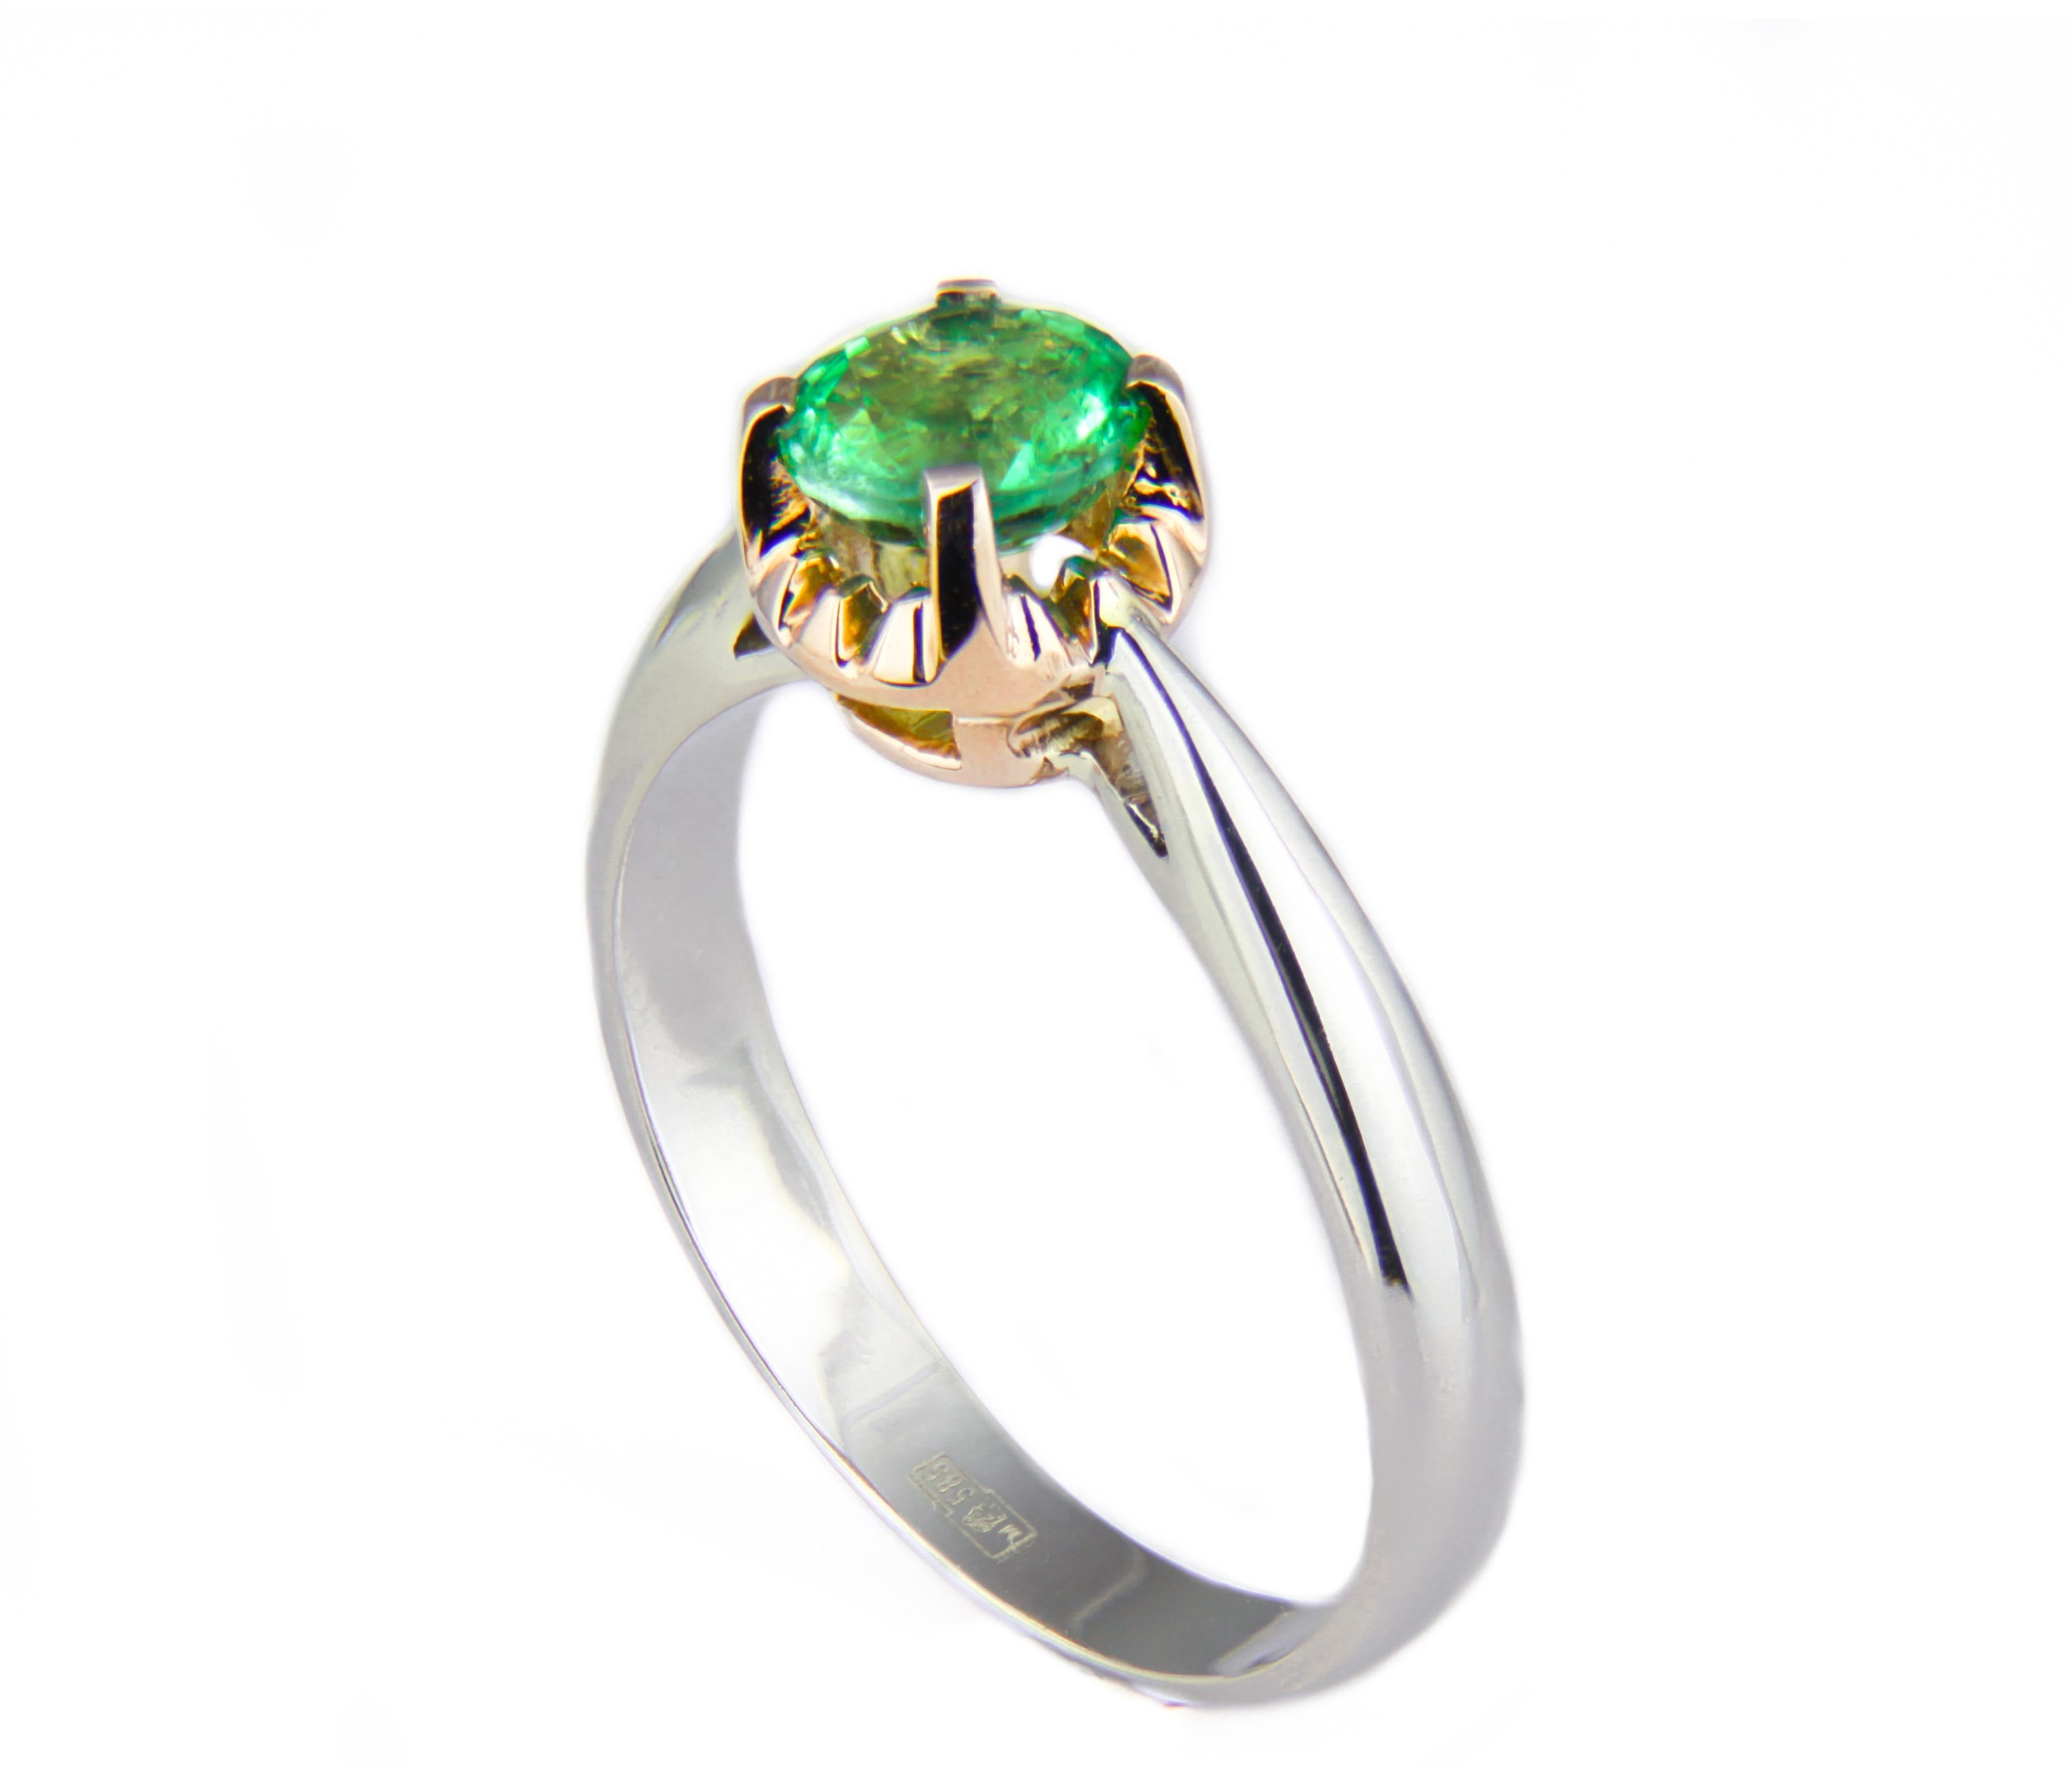 For Sale:  Emerald Soliter Ring in 14k Two Tone Gold, Emerald Engagement Ring 3